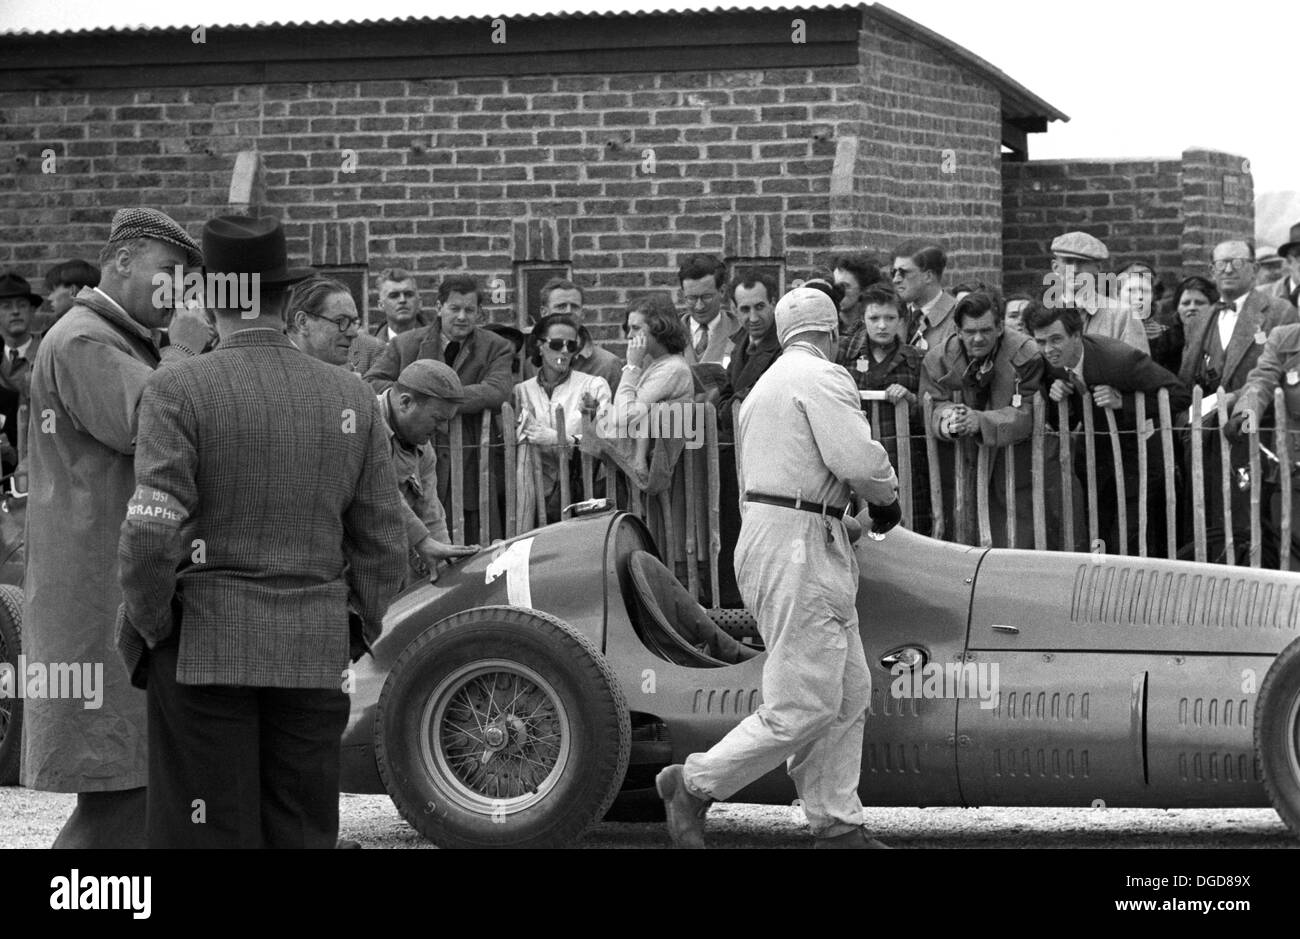 Mechanic Luigi Parenti pushes Dr Farina’s Maserati 4CLT in the assembly area at Goodwood, England 1951. Stock Photo